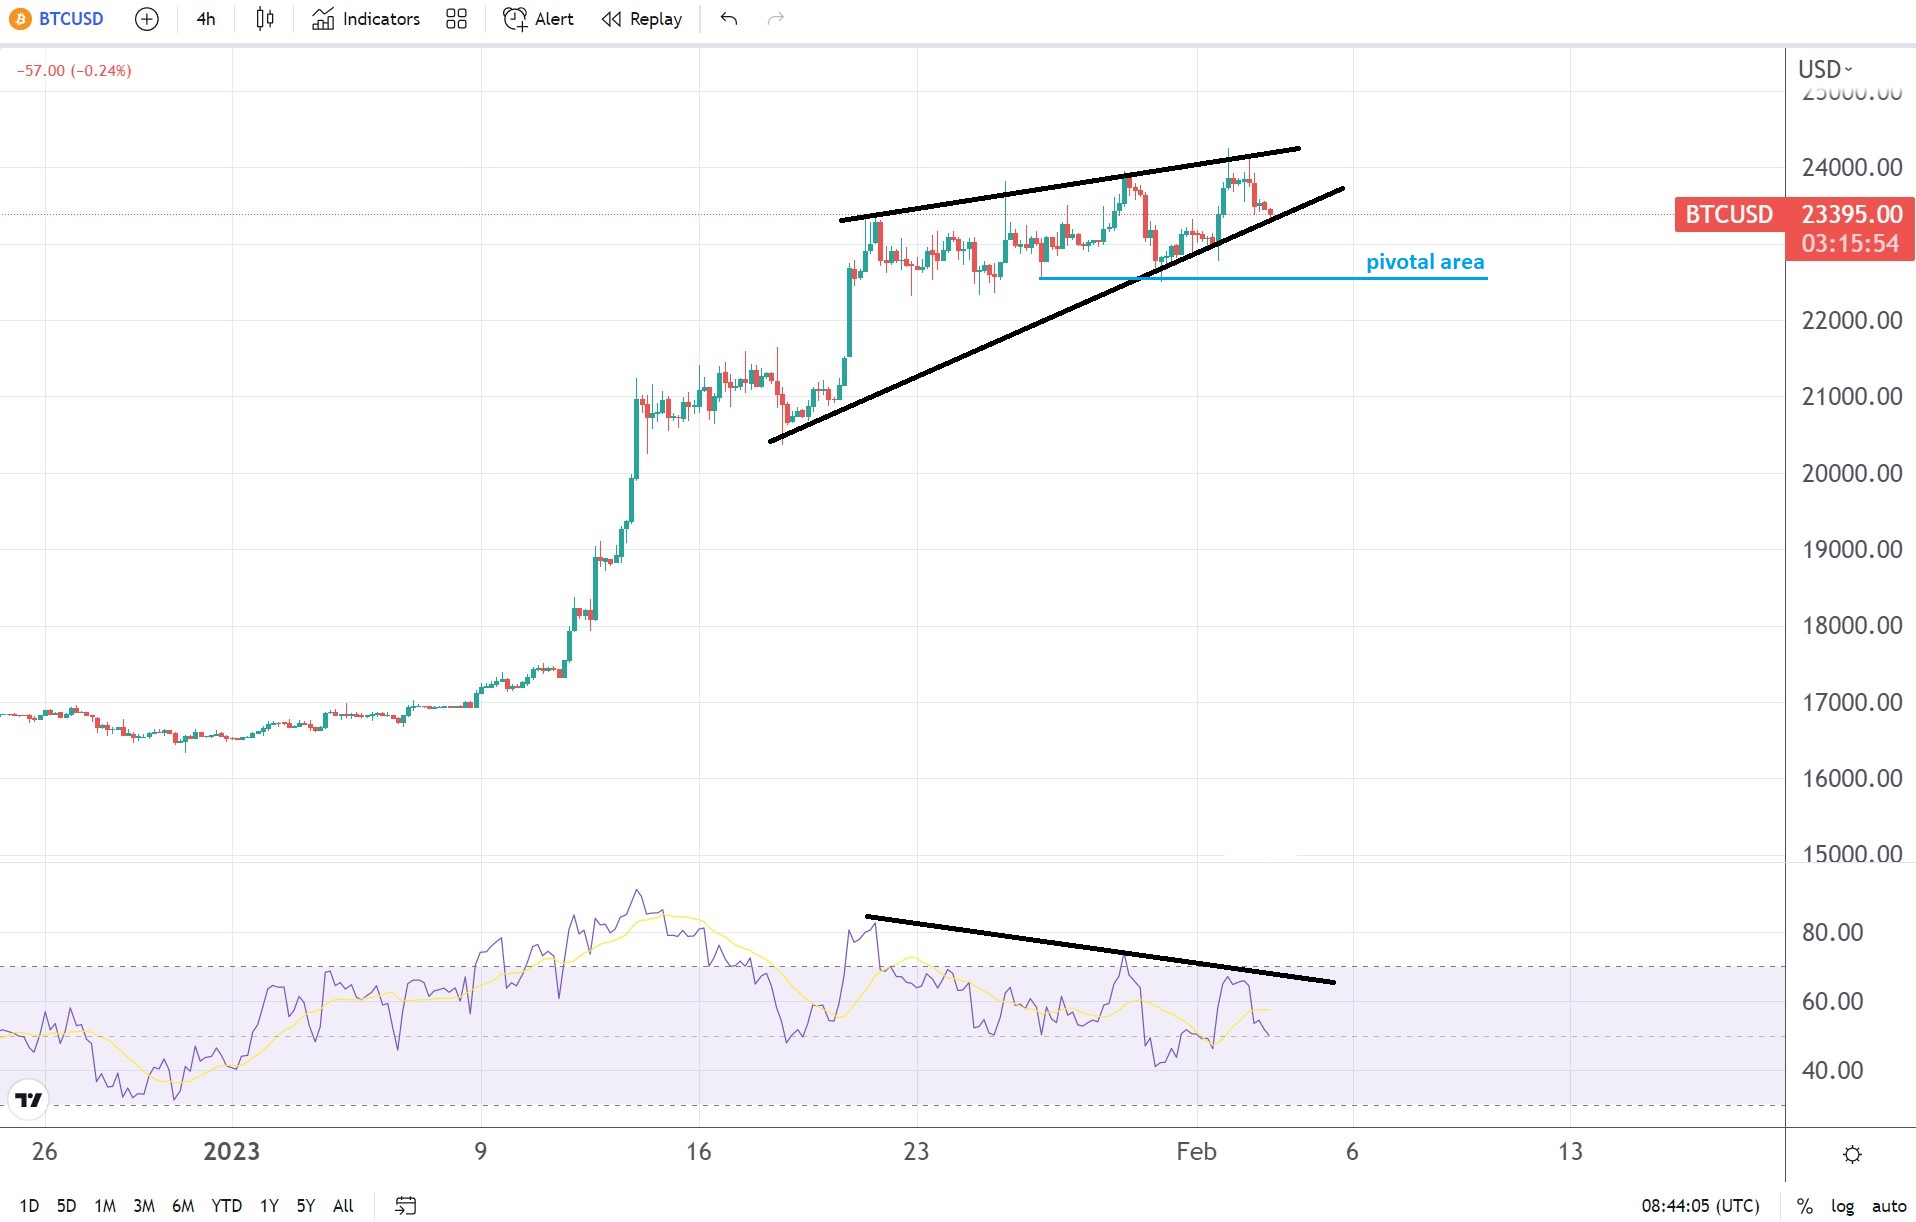 BTC/USD price forecast following the Fed’s decision